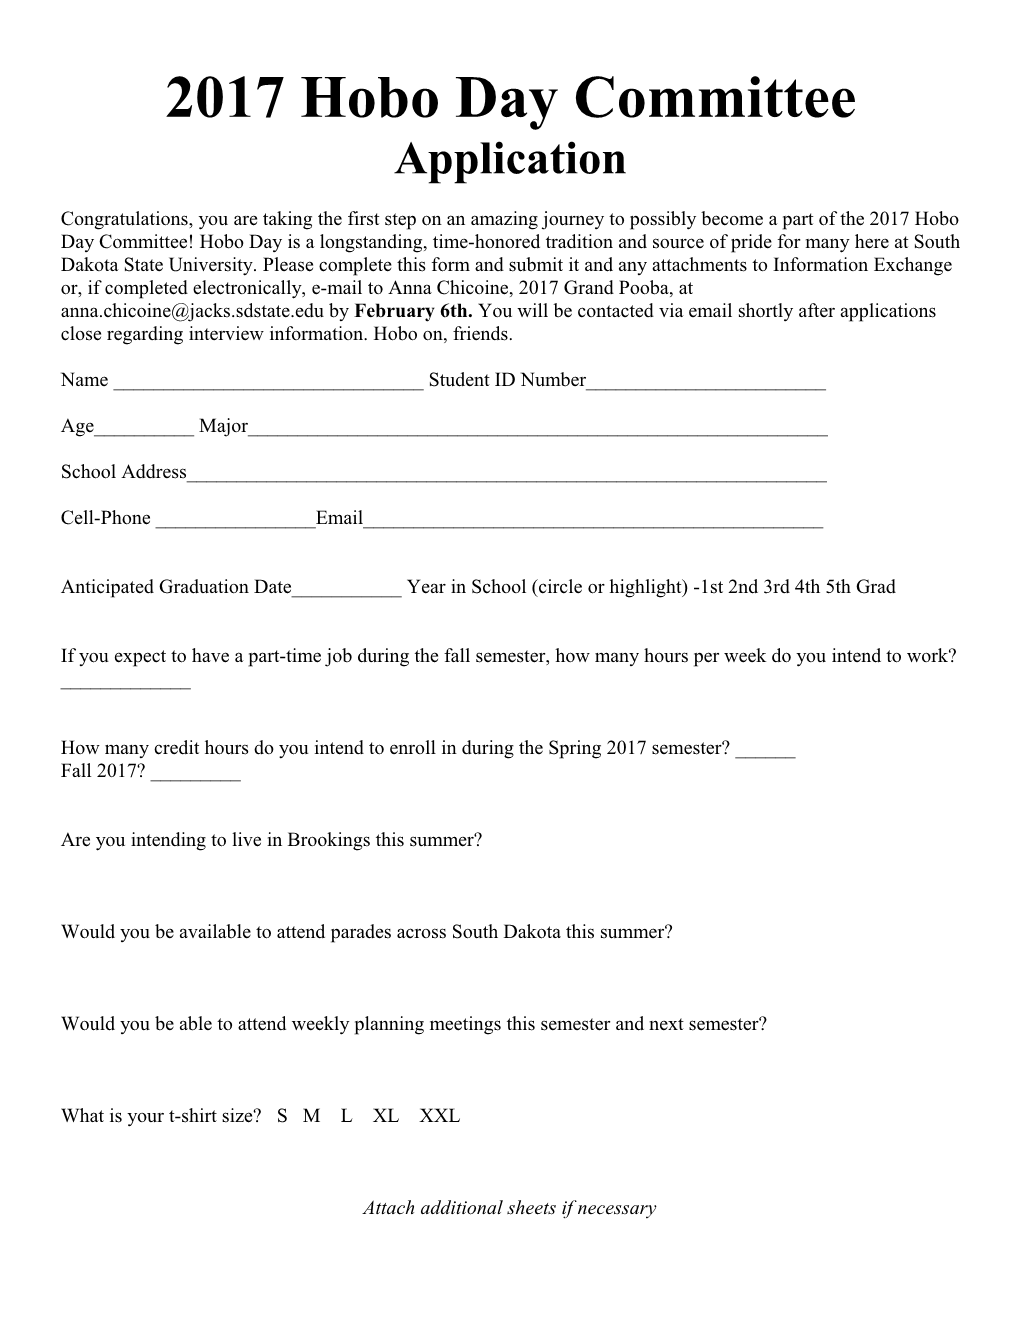 2017 Hobo Day Committeeapplication